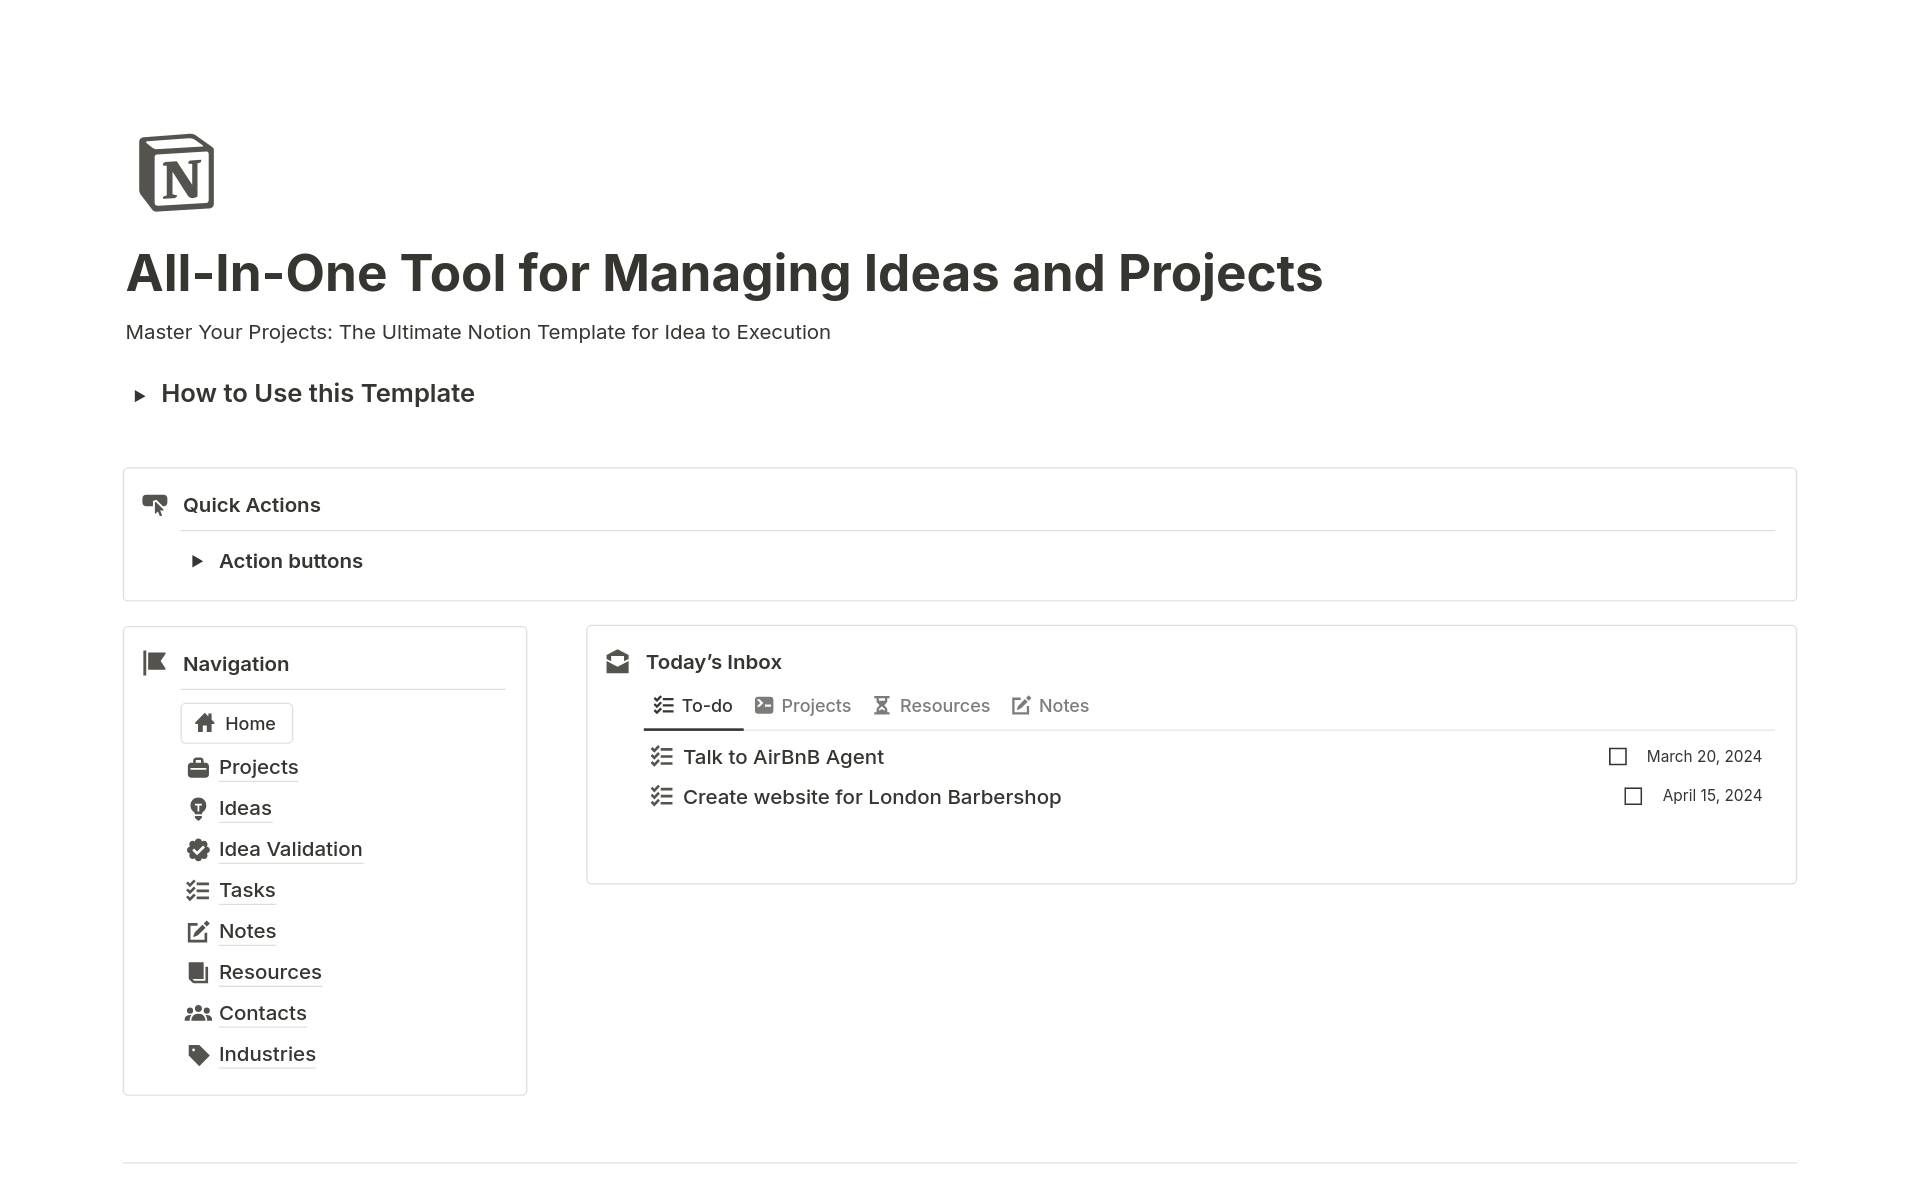 All-In-One Tool for Managing Ideas and Projects님의 템플릿 미리보기